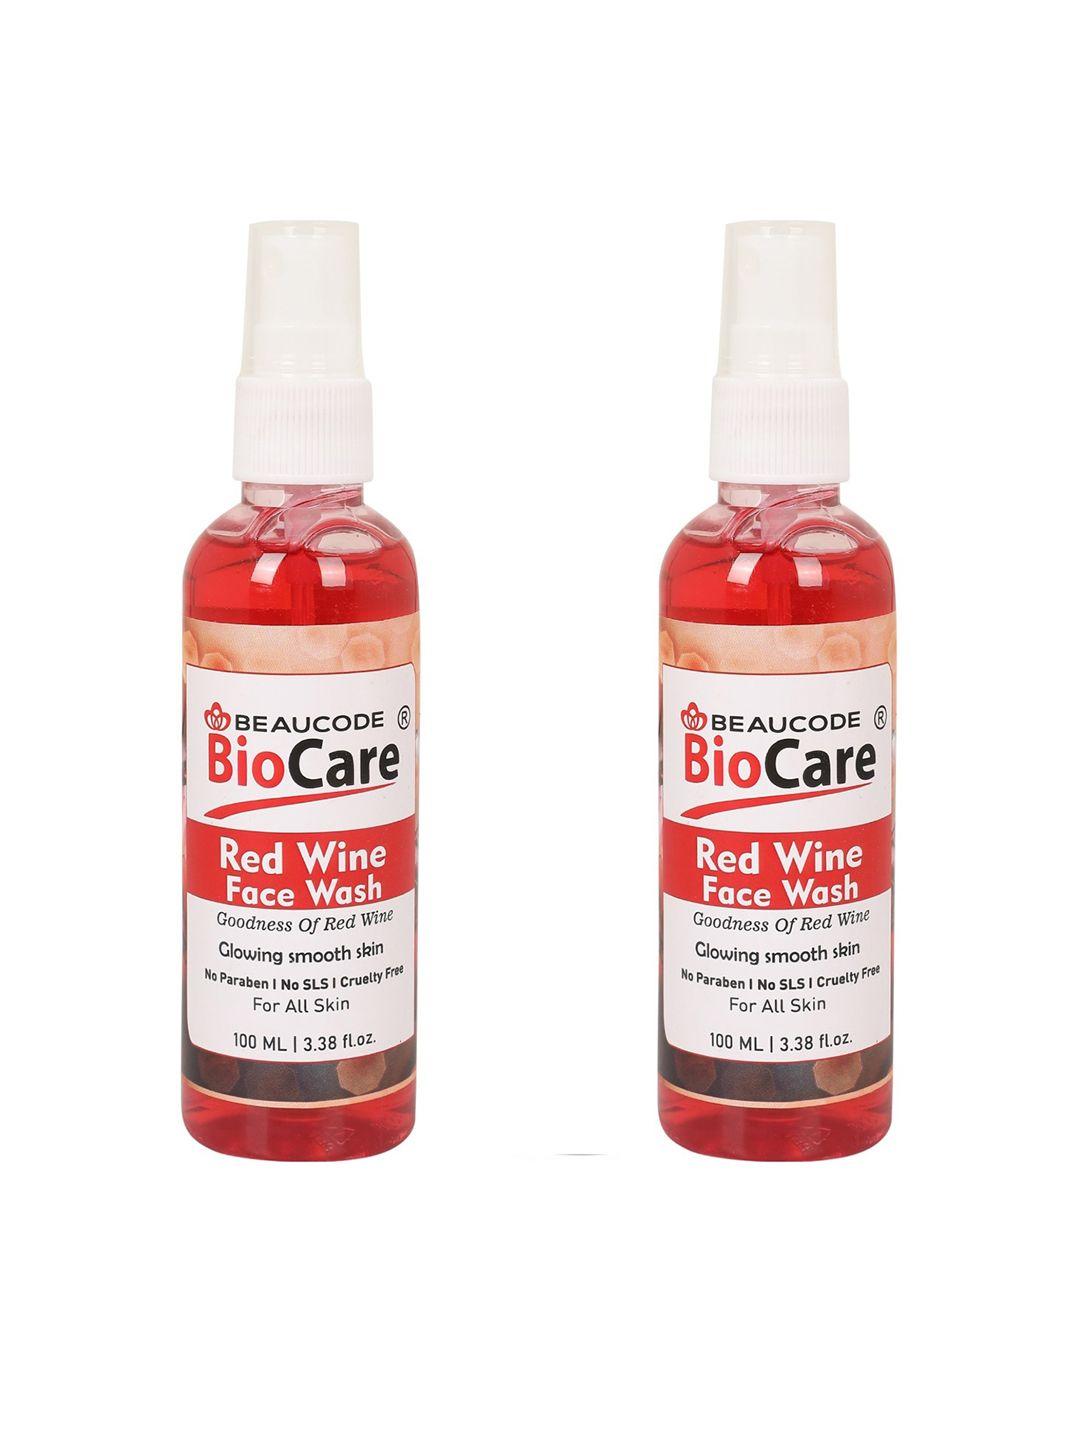 beaucode biocare set of 2 red wine face wash for glowing smooth skin - 100 ml each